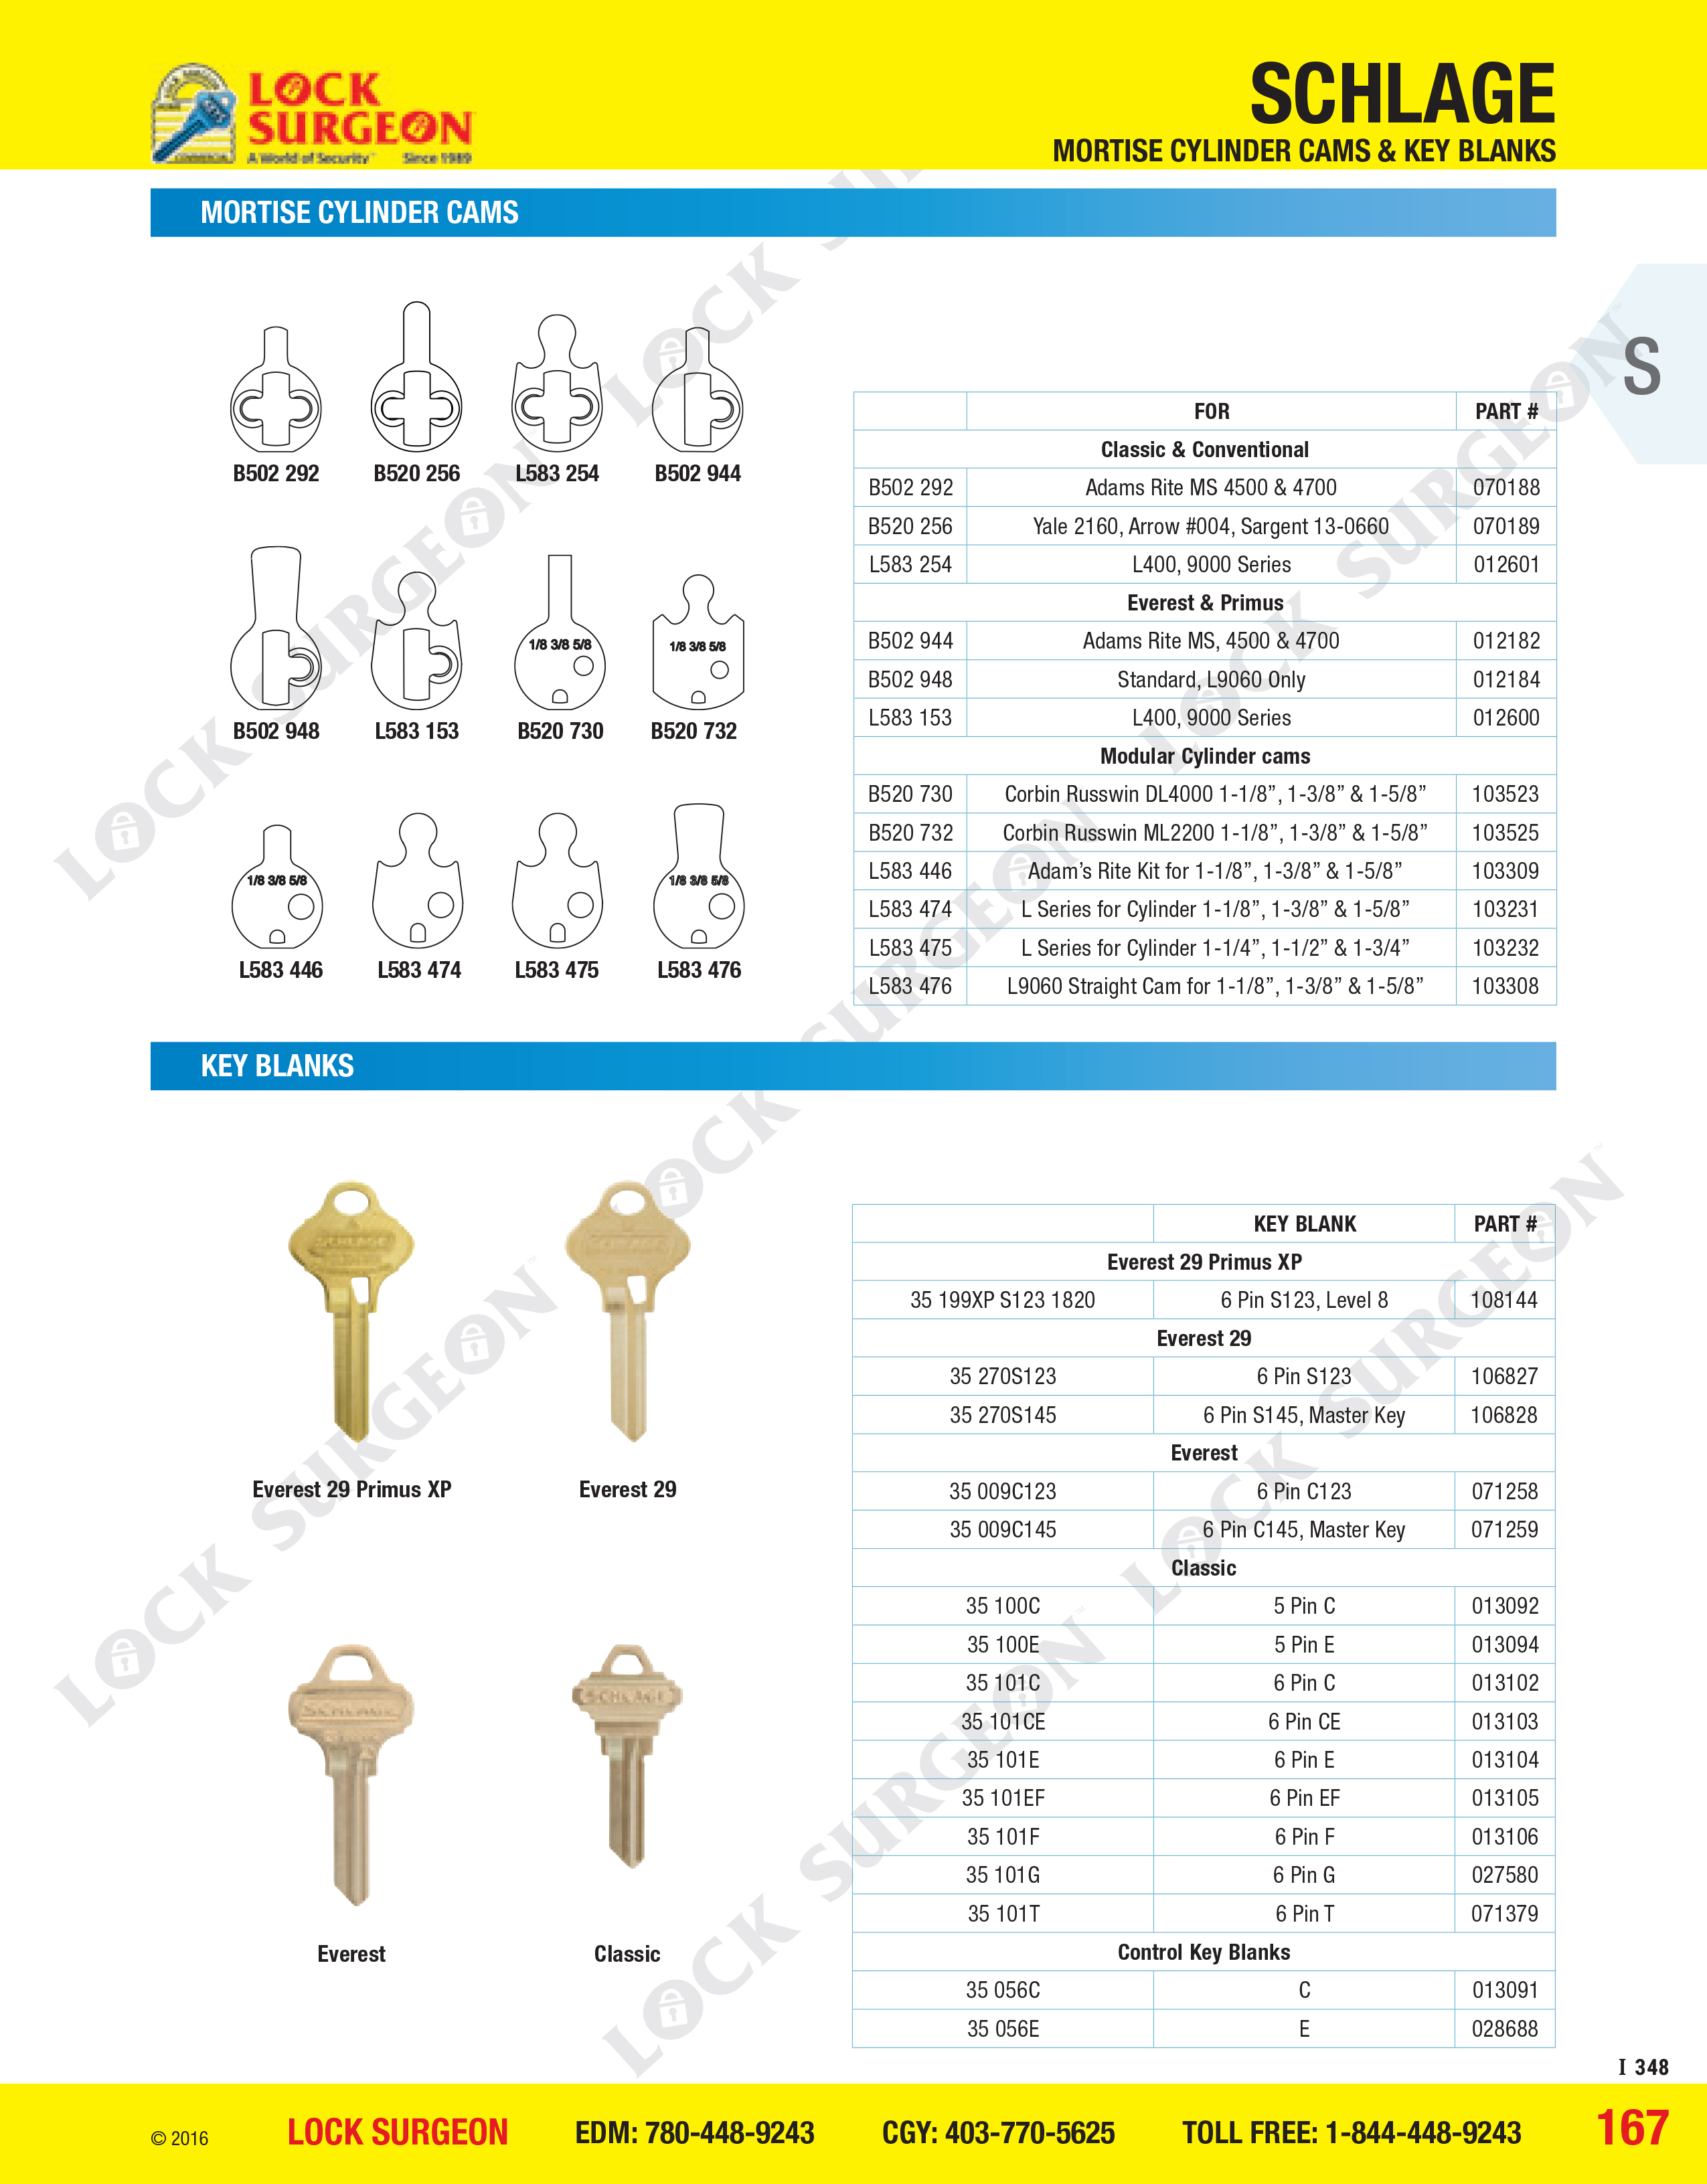 Mortise cylinder cams and key blanks